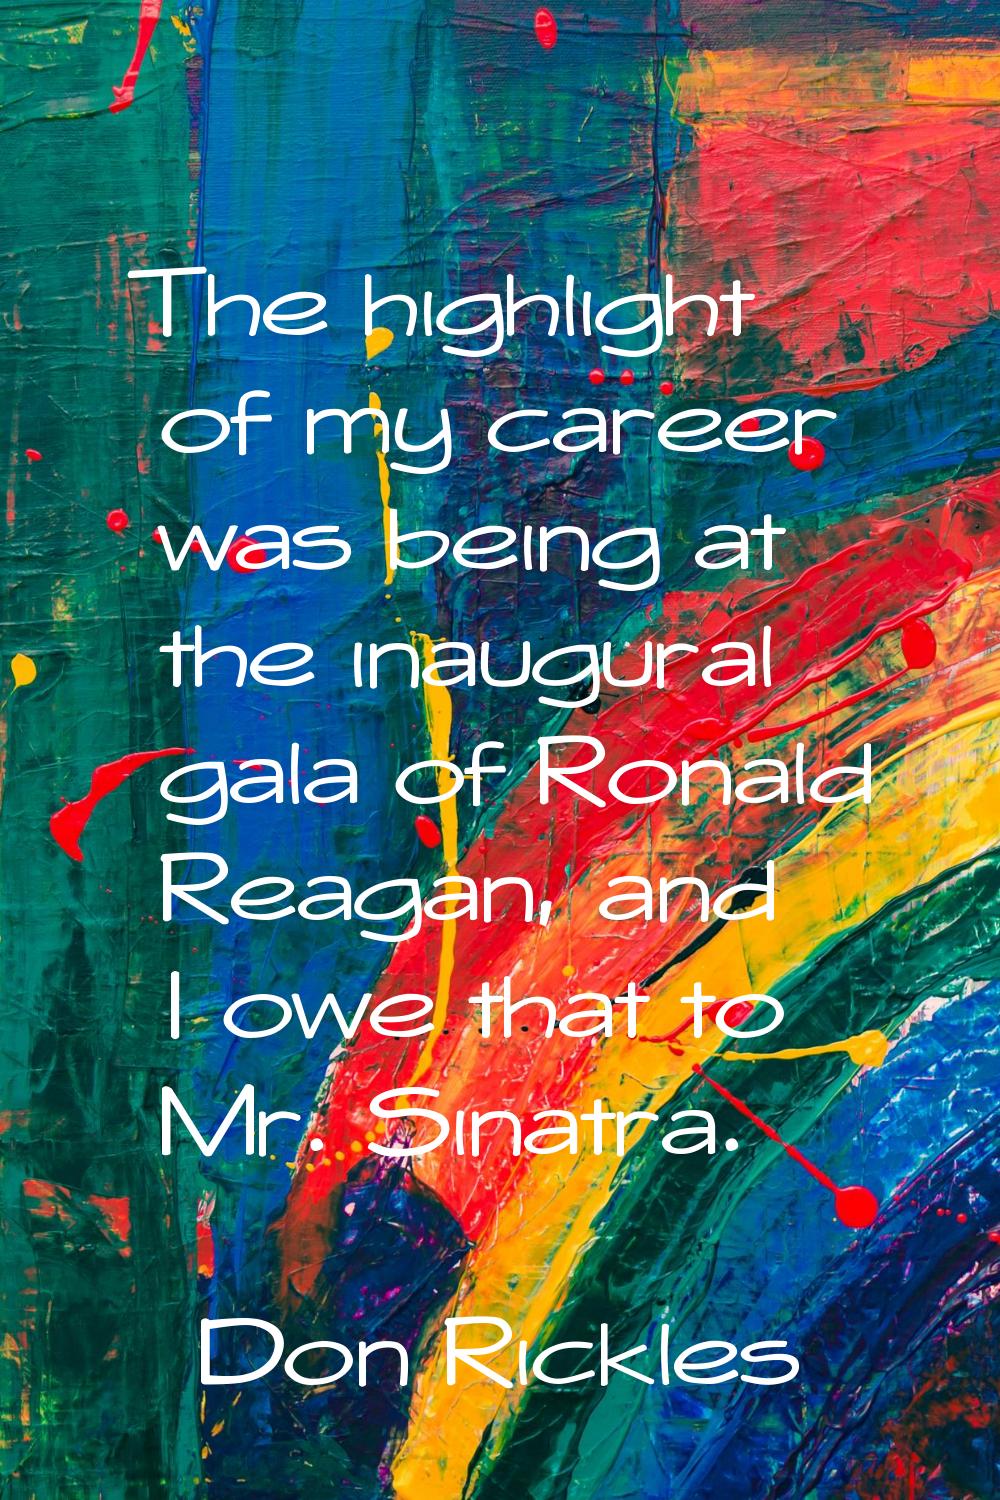 The highlight of my career was being at the inaugural gala of Ronald Reagan, and I owe that to Mr. 